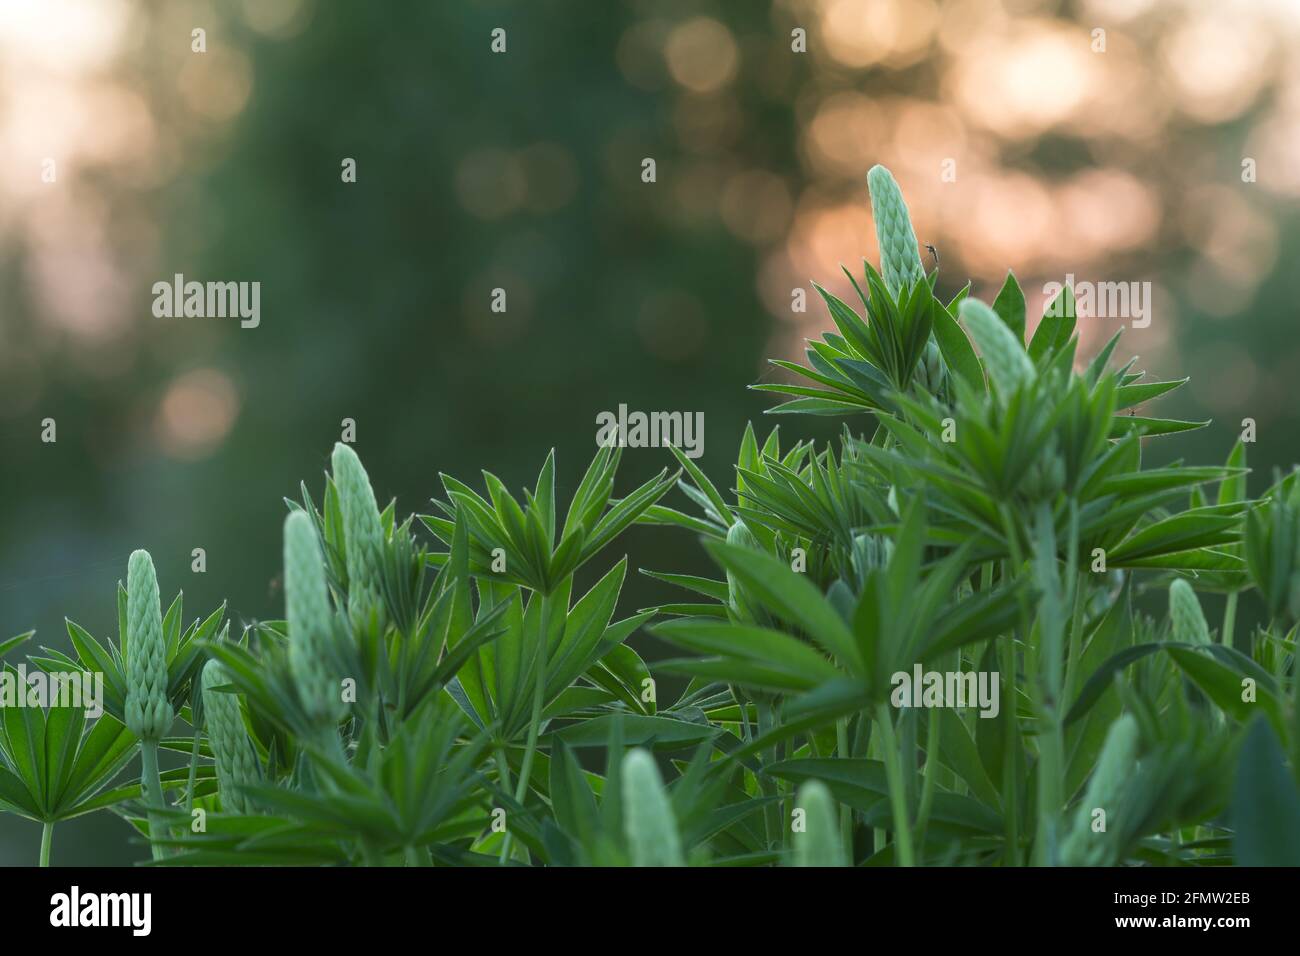 Mosquito resting on lupin plant, reflections in the background Stock Photo